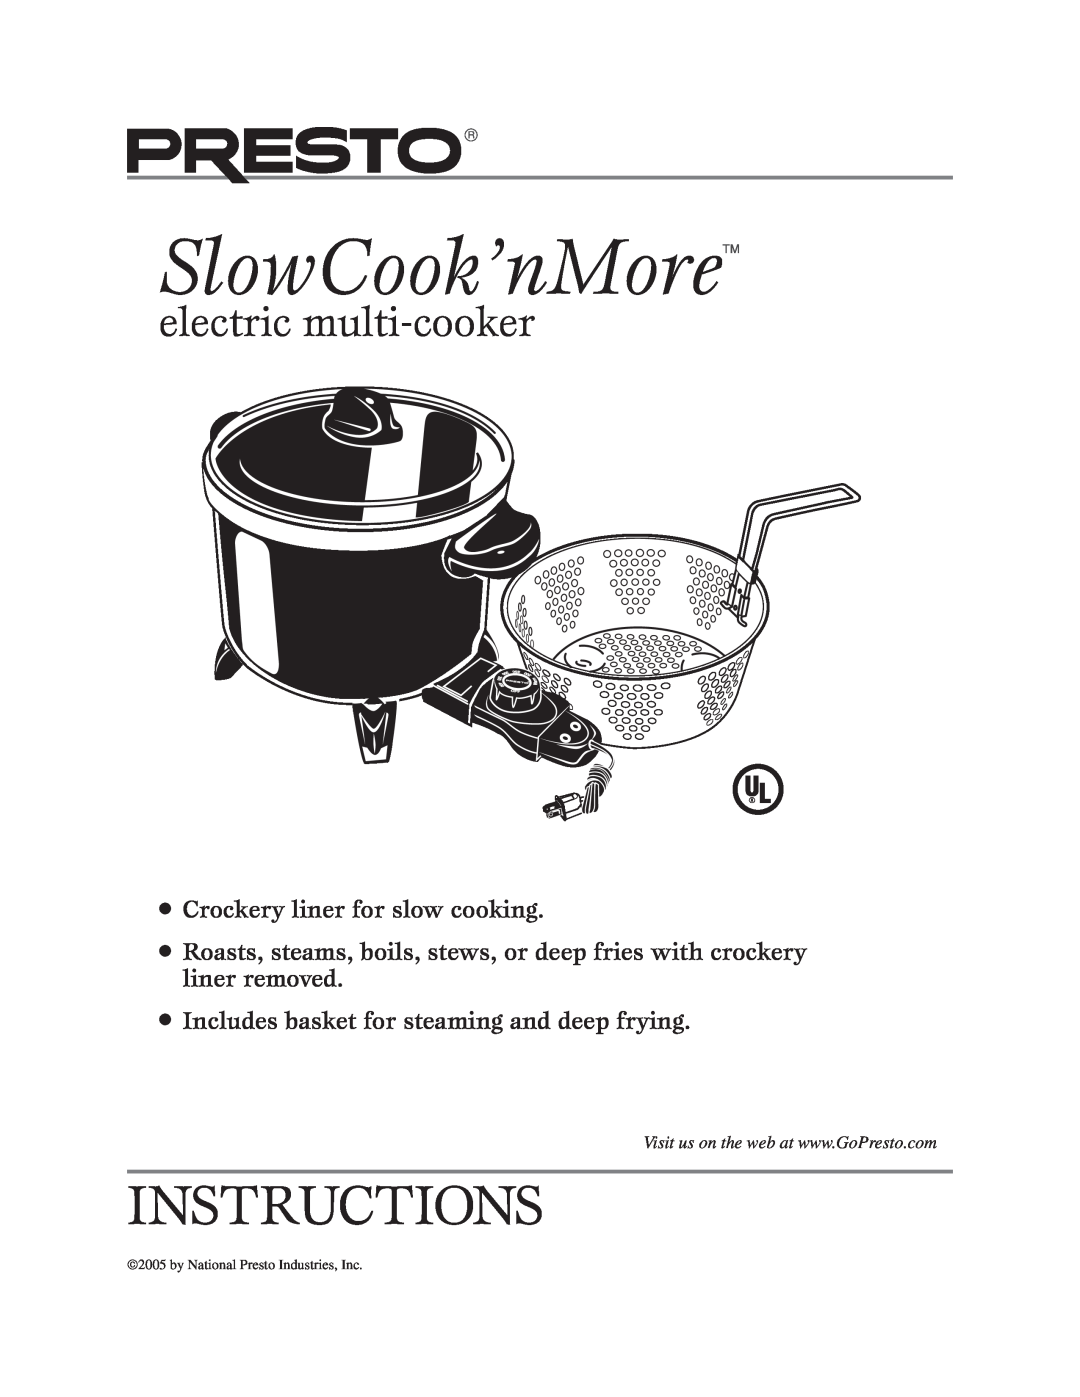 Presto Electric multi-cooker manual SlowCook’nMore, Instructions, electric multi-cooker, Crockery liner for slow cooking 